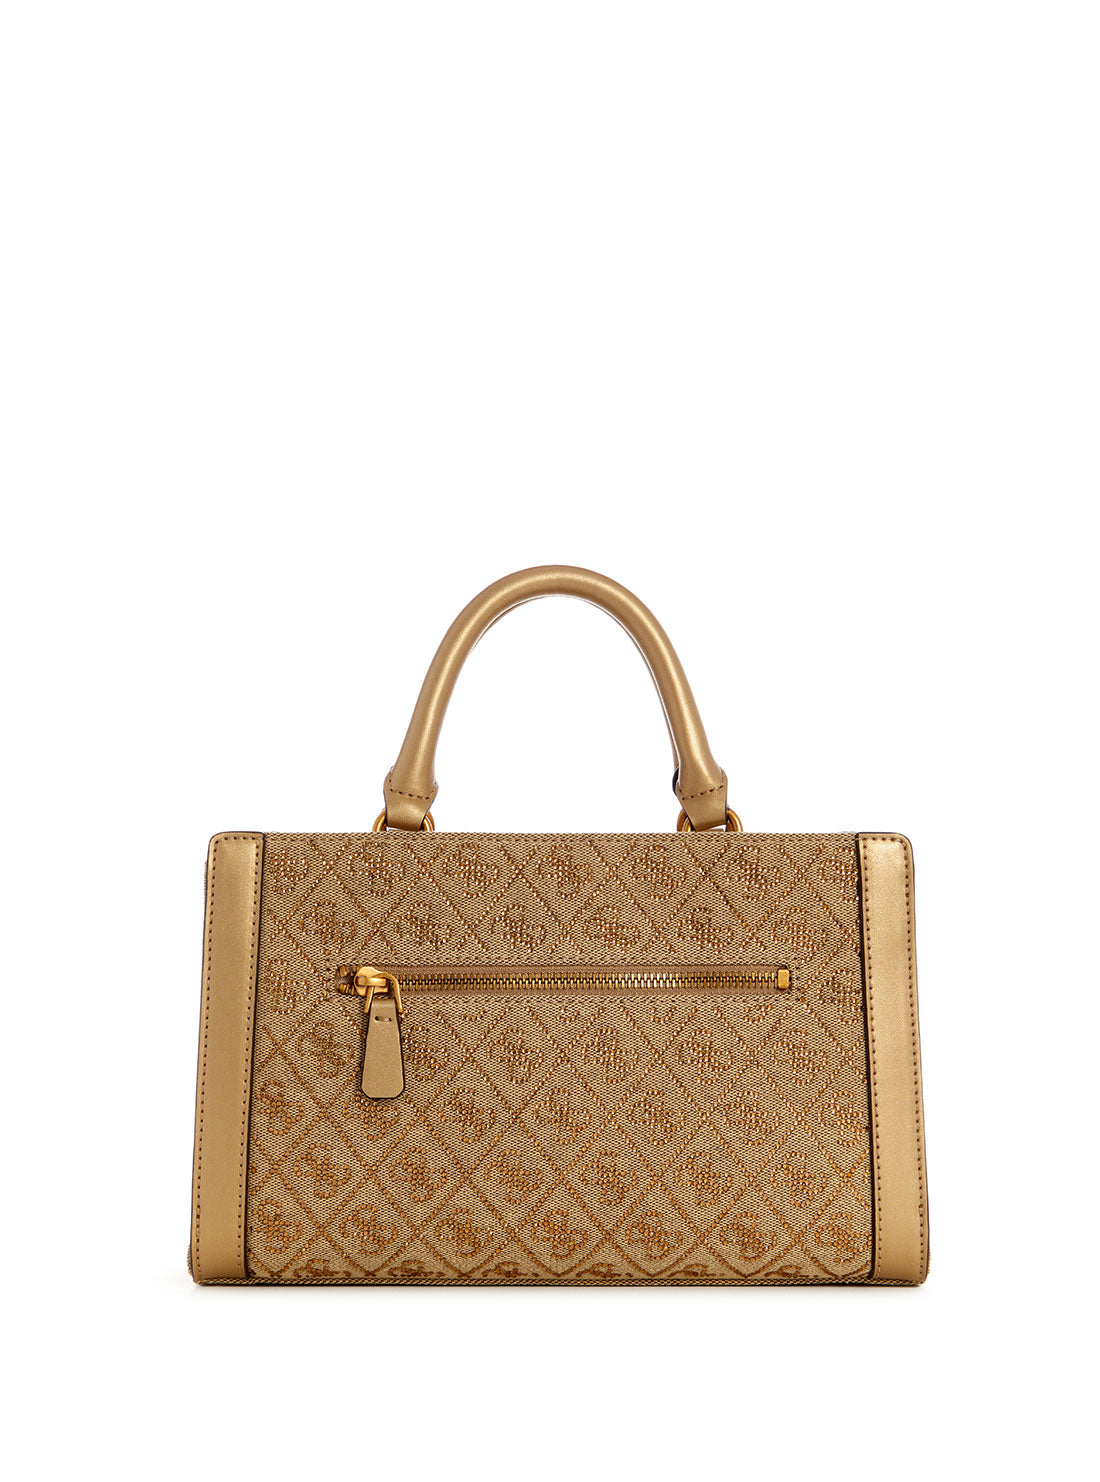 GUESS Gold Logo Small Satchel Bag back view